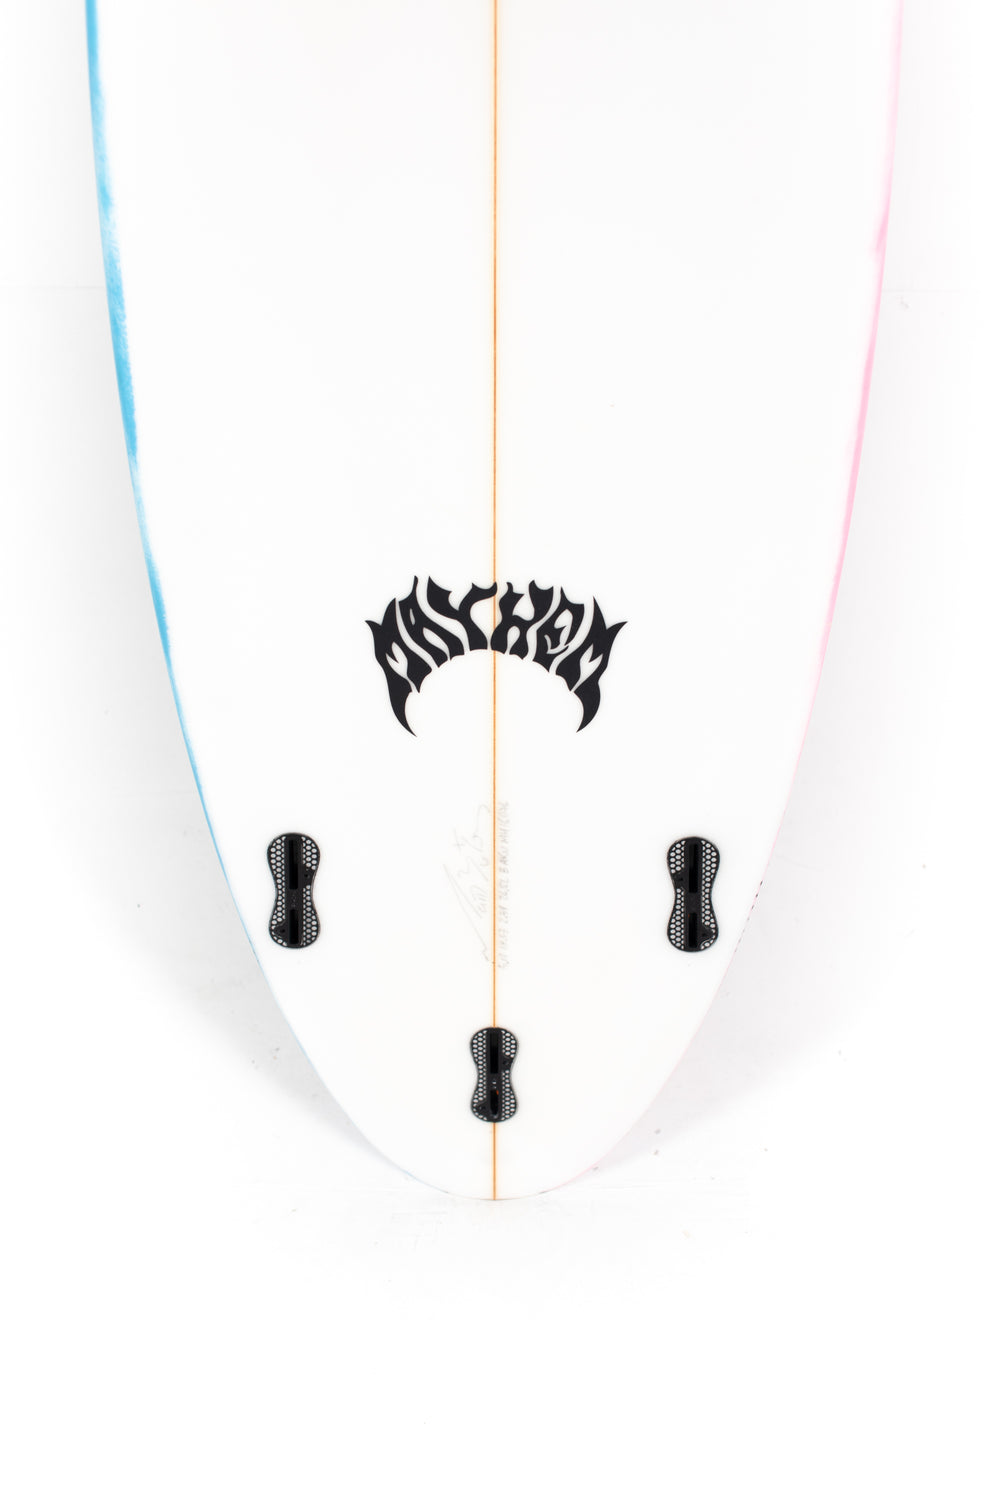 Lost Surfboards - STEP DRIVER by Mayhem | Buy at PUKAS SURF SHOP